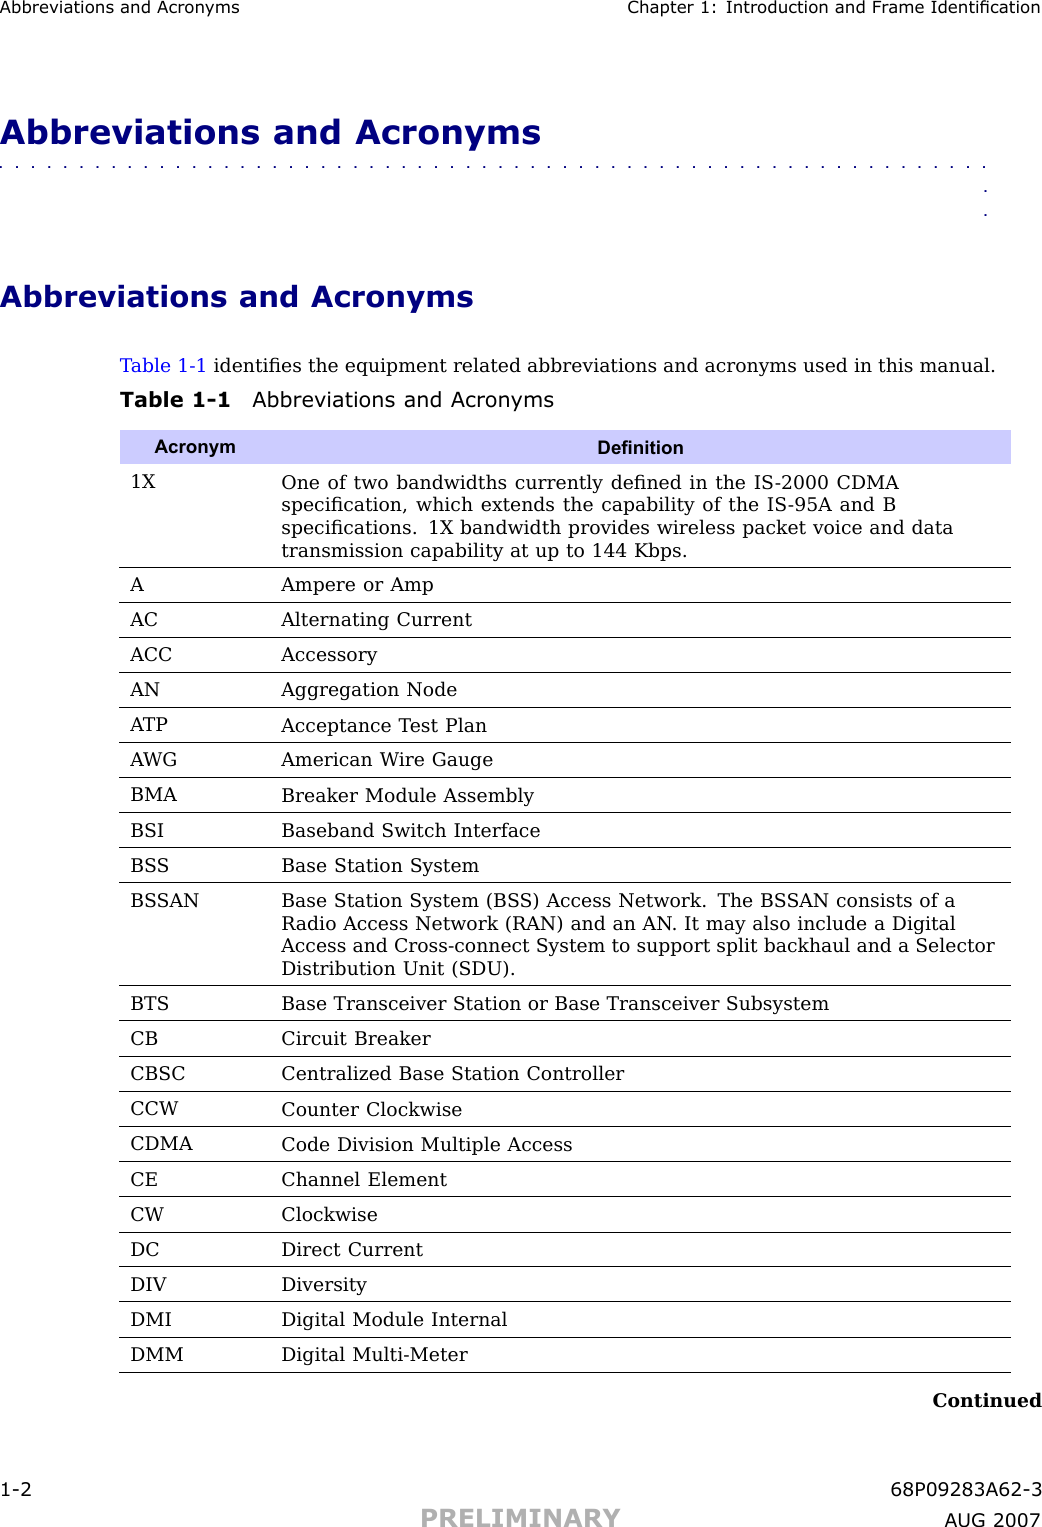 Abbreviations and Acron yms Chapter 1: Introduction and Fr ame IdenticationAbbreviations and Acronyms■■■■■■■■■■■■■■■■■■■■■■■■■■■■■■■■■■■■■■■■■■■■■■■■■■■■■■■■■■■■■■■■Abbreviations and AcronymsT able 1 -1 identiﬁes the equipment related abbreviations and acronyms used in this manual.Table 1 -1 Abbreviations and Acron ymsAcronymDenition1XOne of two bandwidths currently deﬁned in the IS -2000 CDMAspeciﬁcation, which extends the capability of the IS -95A and Bspeciﬁcations. 1X bandwidth provides wireless packet voice and datatransmission capability at up to 144 Kbps.A Ampere or AmpACAlternating CurrentACCAccessoryANAggregation NodeA TPAcceptance T est PlanA WG American W ire GaugeBMABreaker Module AssemblyBSIBaseband Switch InterfaceBS S Base Station SystemBS SANBase Station System (BS S) Access Network. The BS SAN consists of aR adio Access Network (RAN) and an AN . It may also include a DigitalAccess and Cross-connect System to support split backhaul and a SelectorDistribution Unit (SDU).BTSBase Transceiver Station or Base Transceiver SubsystemCBCircuit BreakerCBSCCentralized Base Station ControllerCCWCounter ClockwiseCDMACode Division Multiple AccessCEChannel ElementCWClockwiseDC Direct CurrentDIVDiversityDMIDigital Module InternalDMMDigital Multi-MeterContinued1 -2 68P09283A62 -3PRELIMINARY A UG 2007